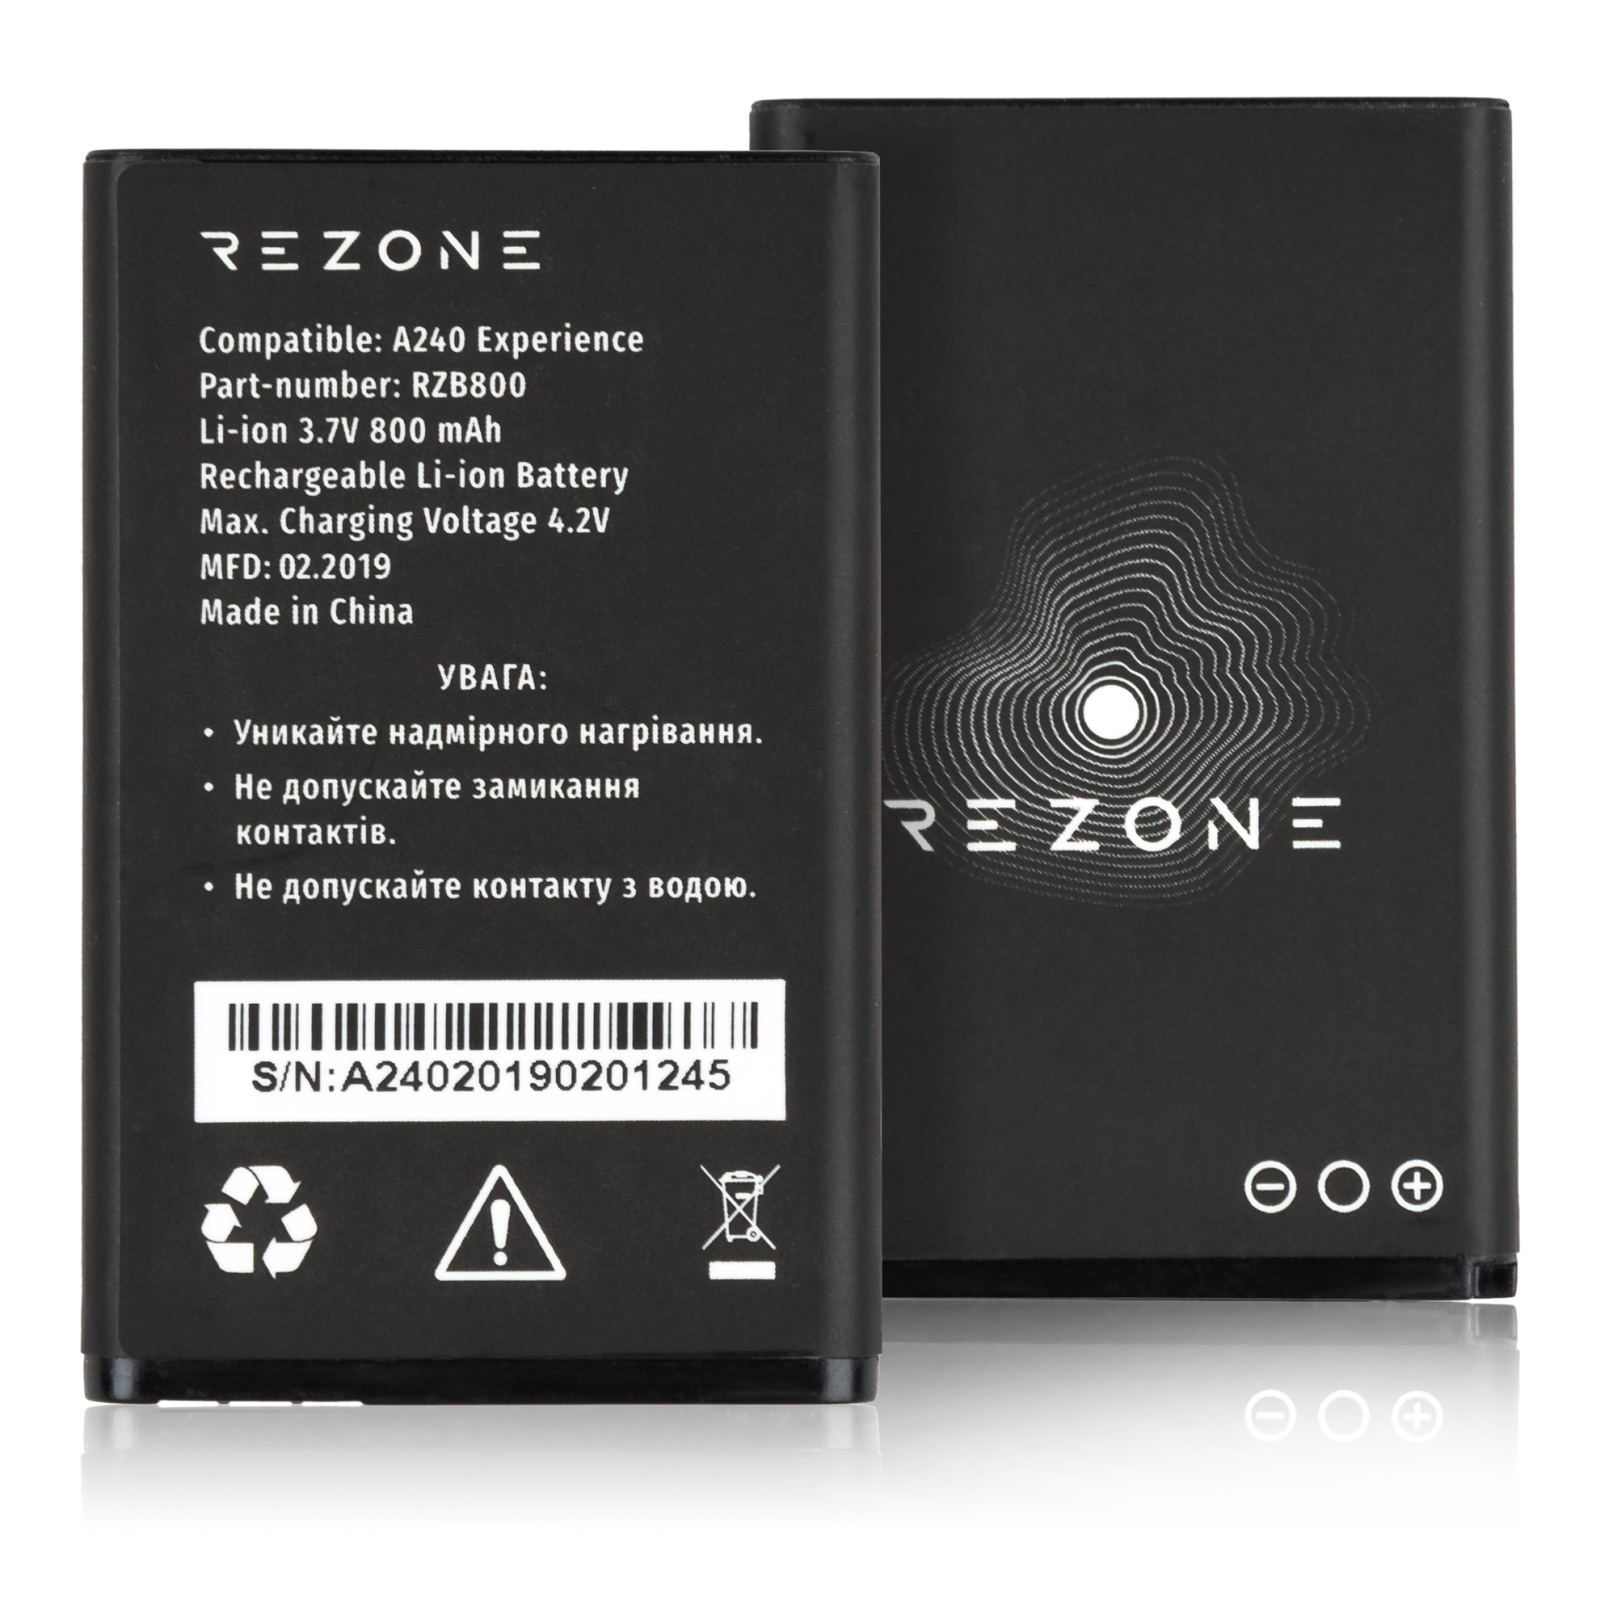 Акумуляторна батарея Rezone for A240 Experience 800mah (and all compatible with BL-5C) (BL-5C) зображення 3